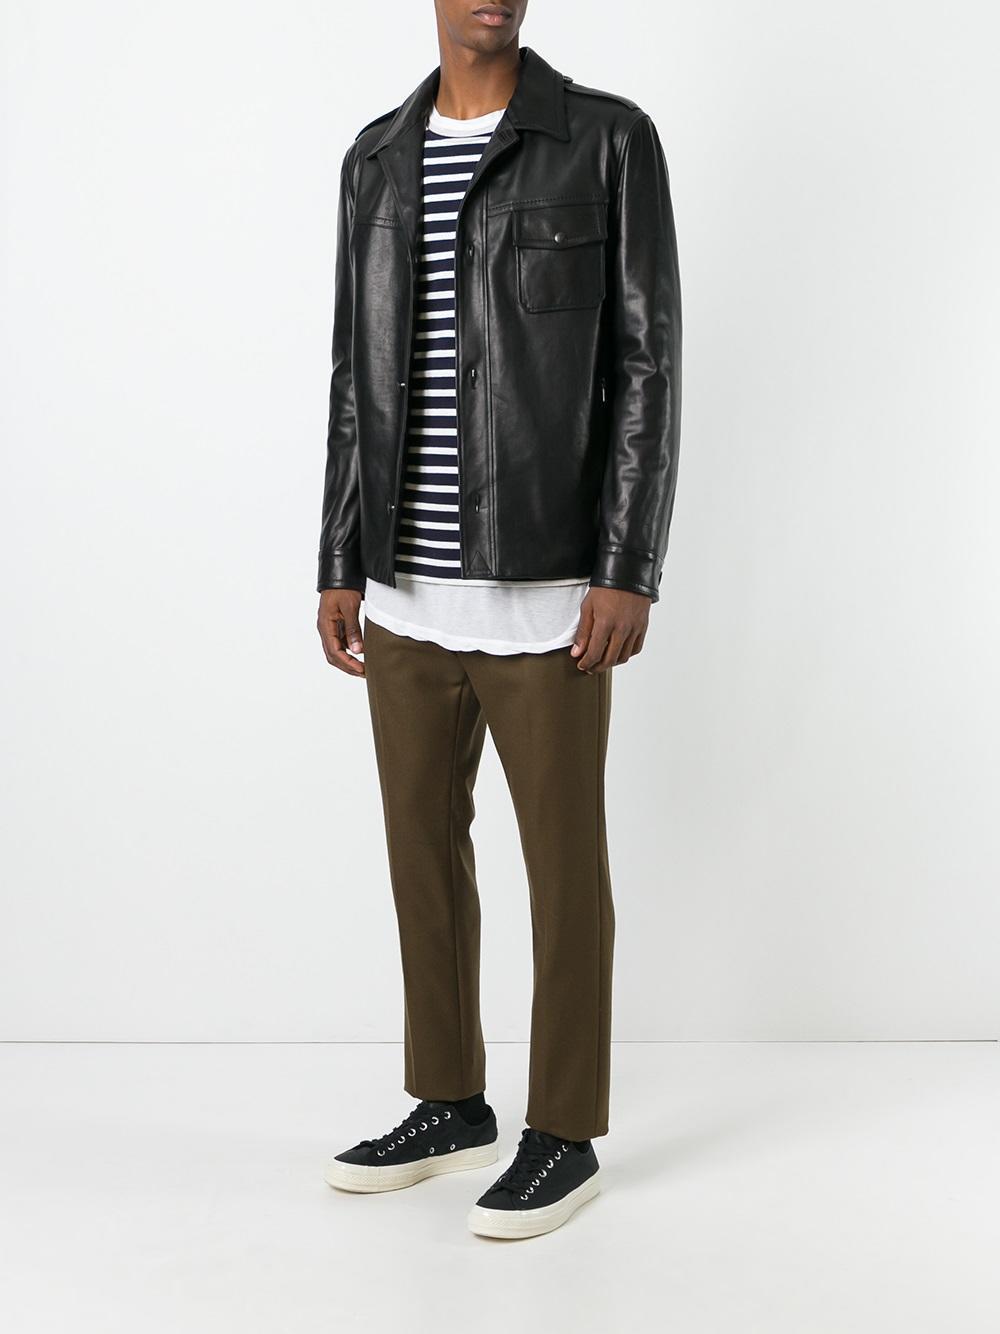 Lyst - Lanvin Button-up Leather Jacket in Black for Men